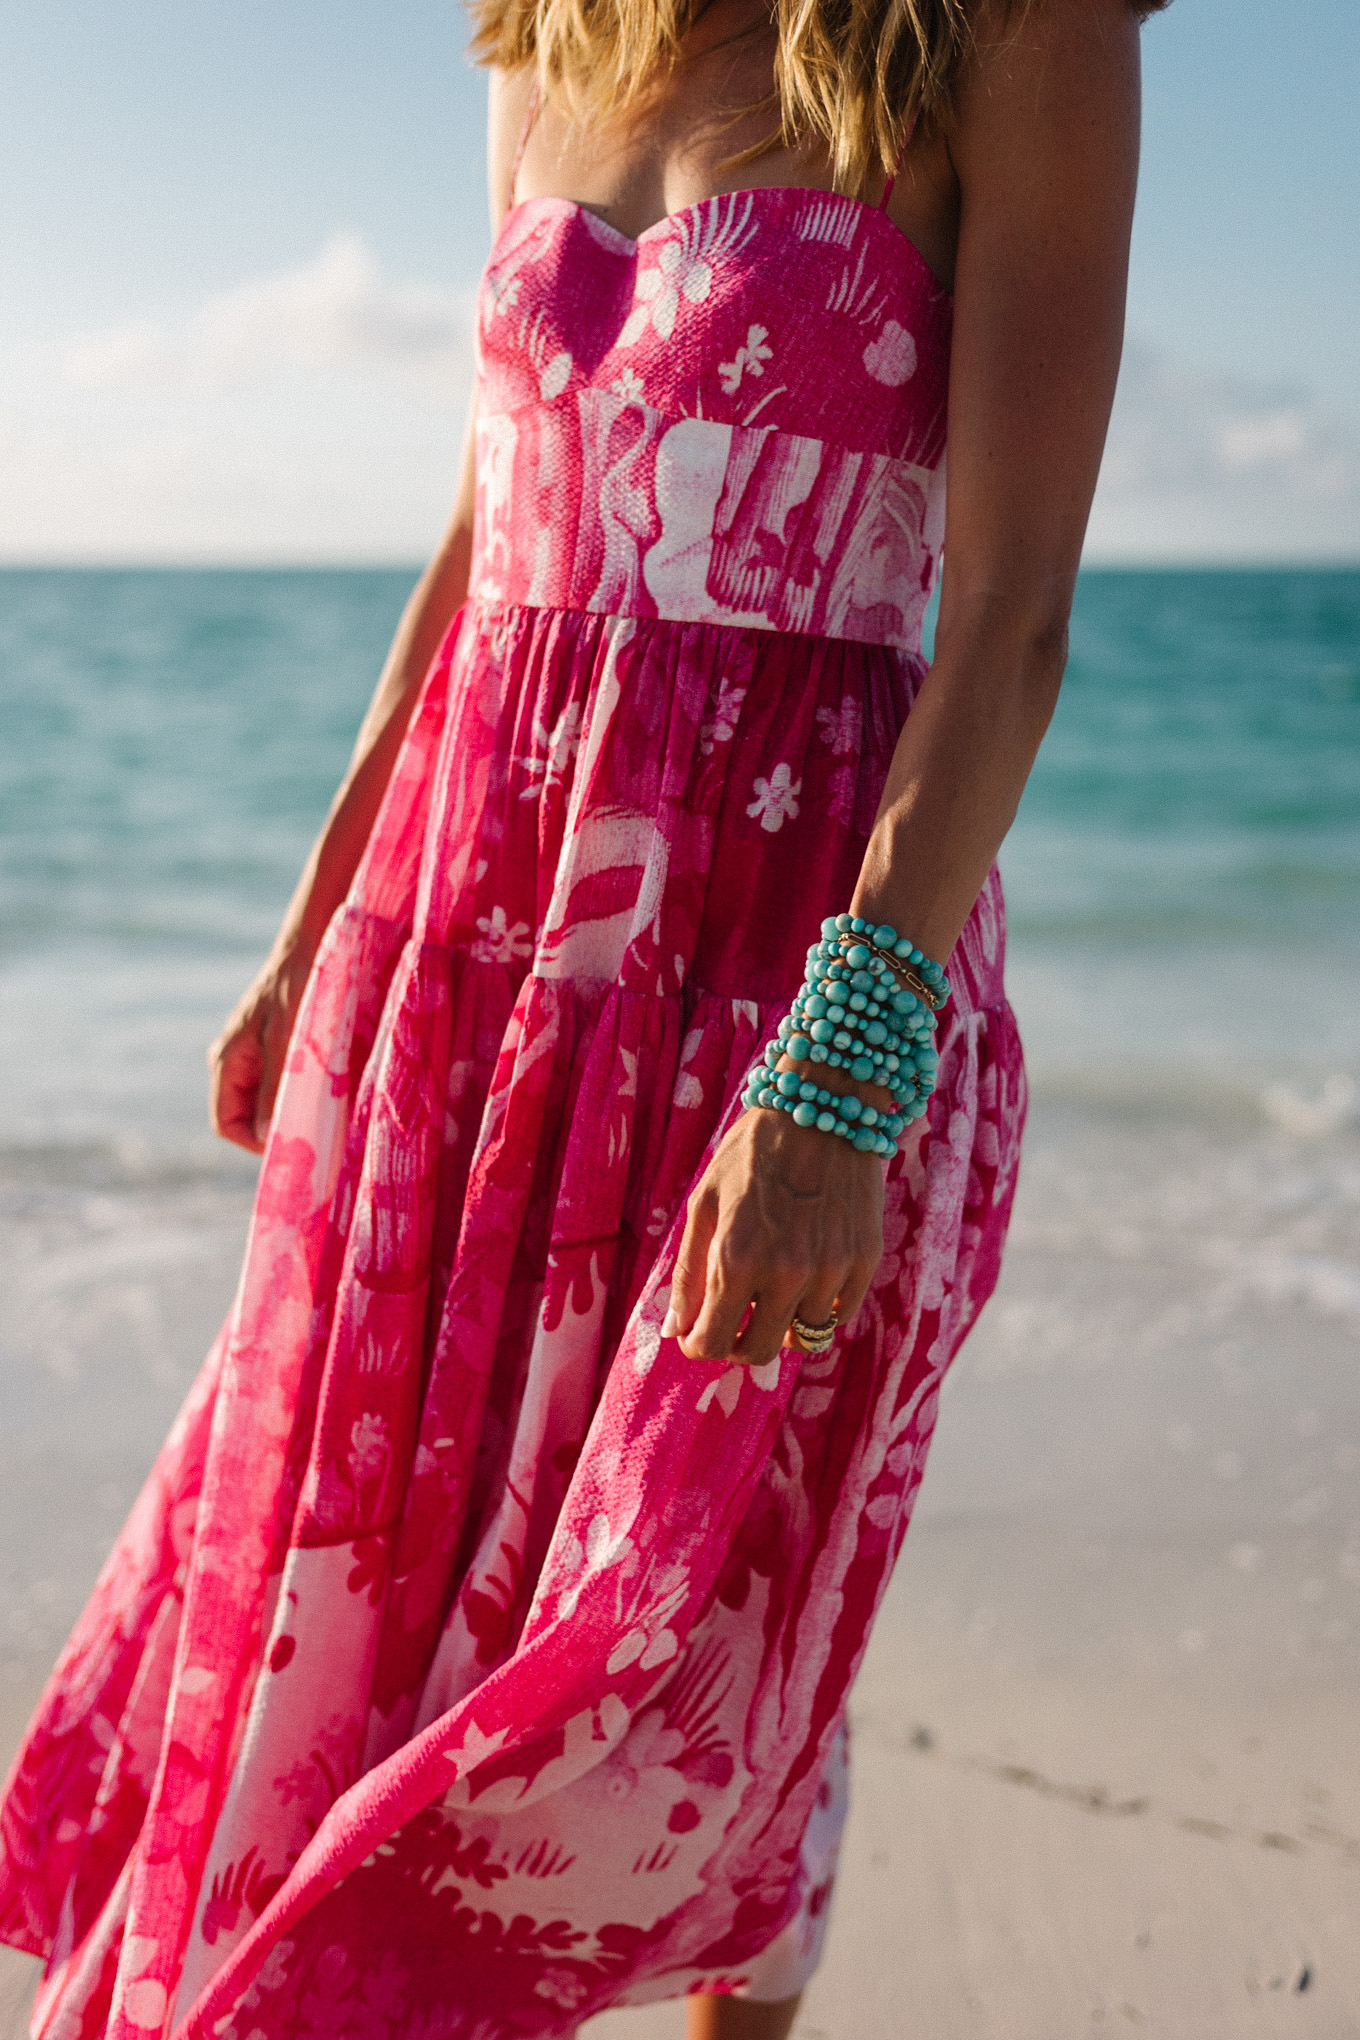 Pink and white floral maxi dress